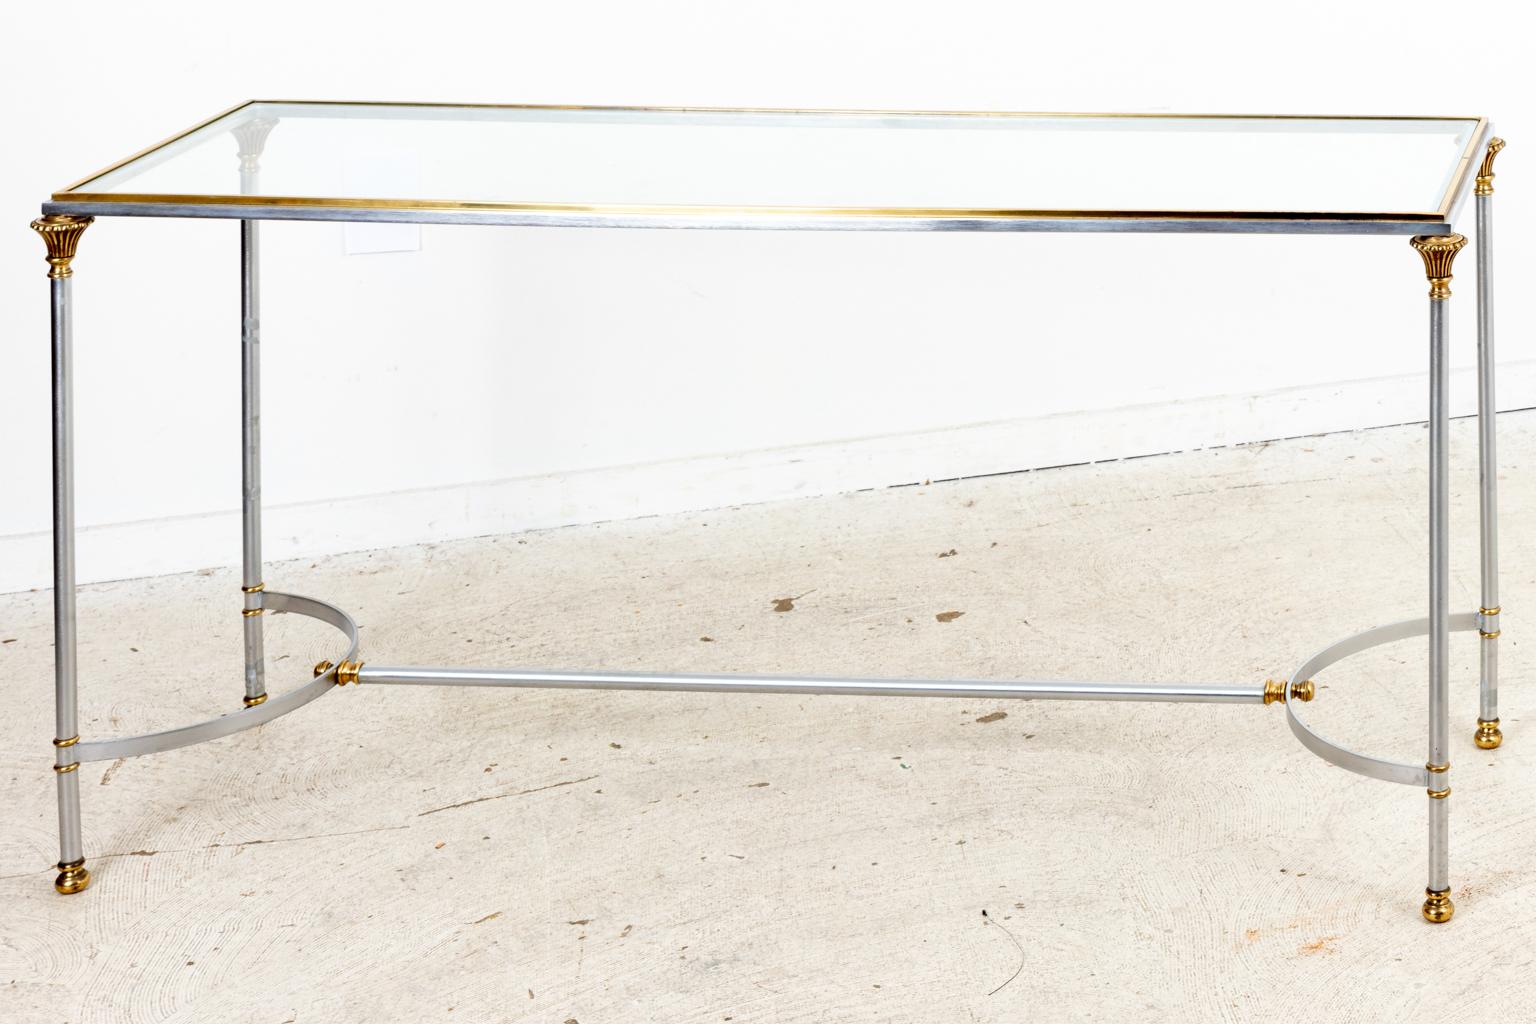 Circa 1970s Mid-Century Modern style Italian Chrome and Brass console table with a glass top made for Bloomingdales. The table features a bottom stretcher. Made in Italy. Please note of wear consistent with age including oxidation and patina.